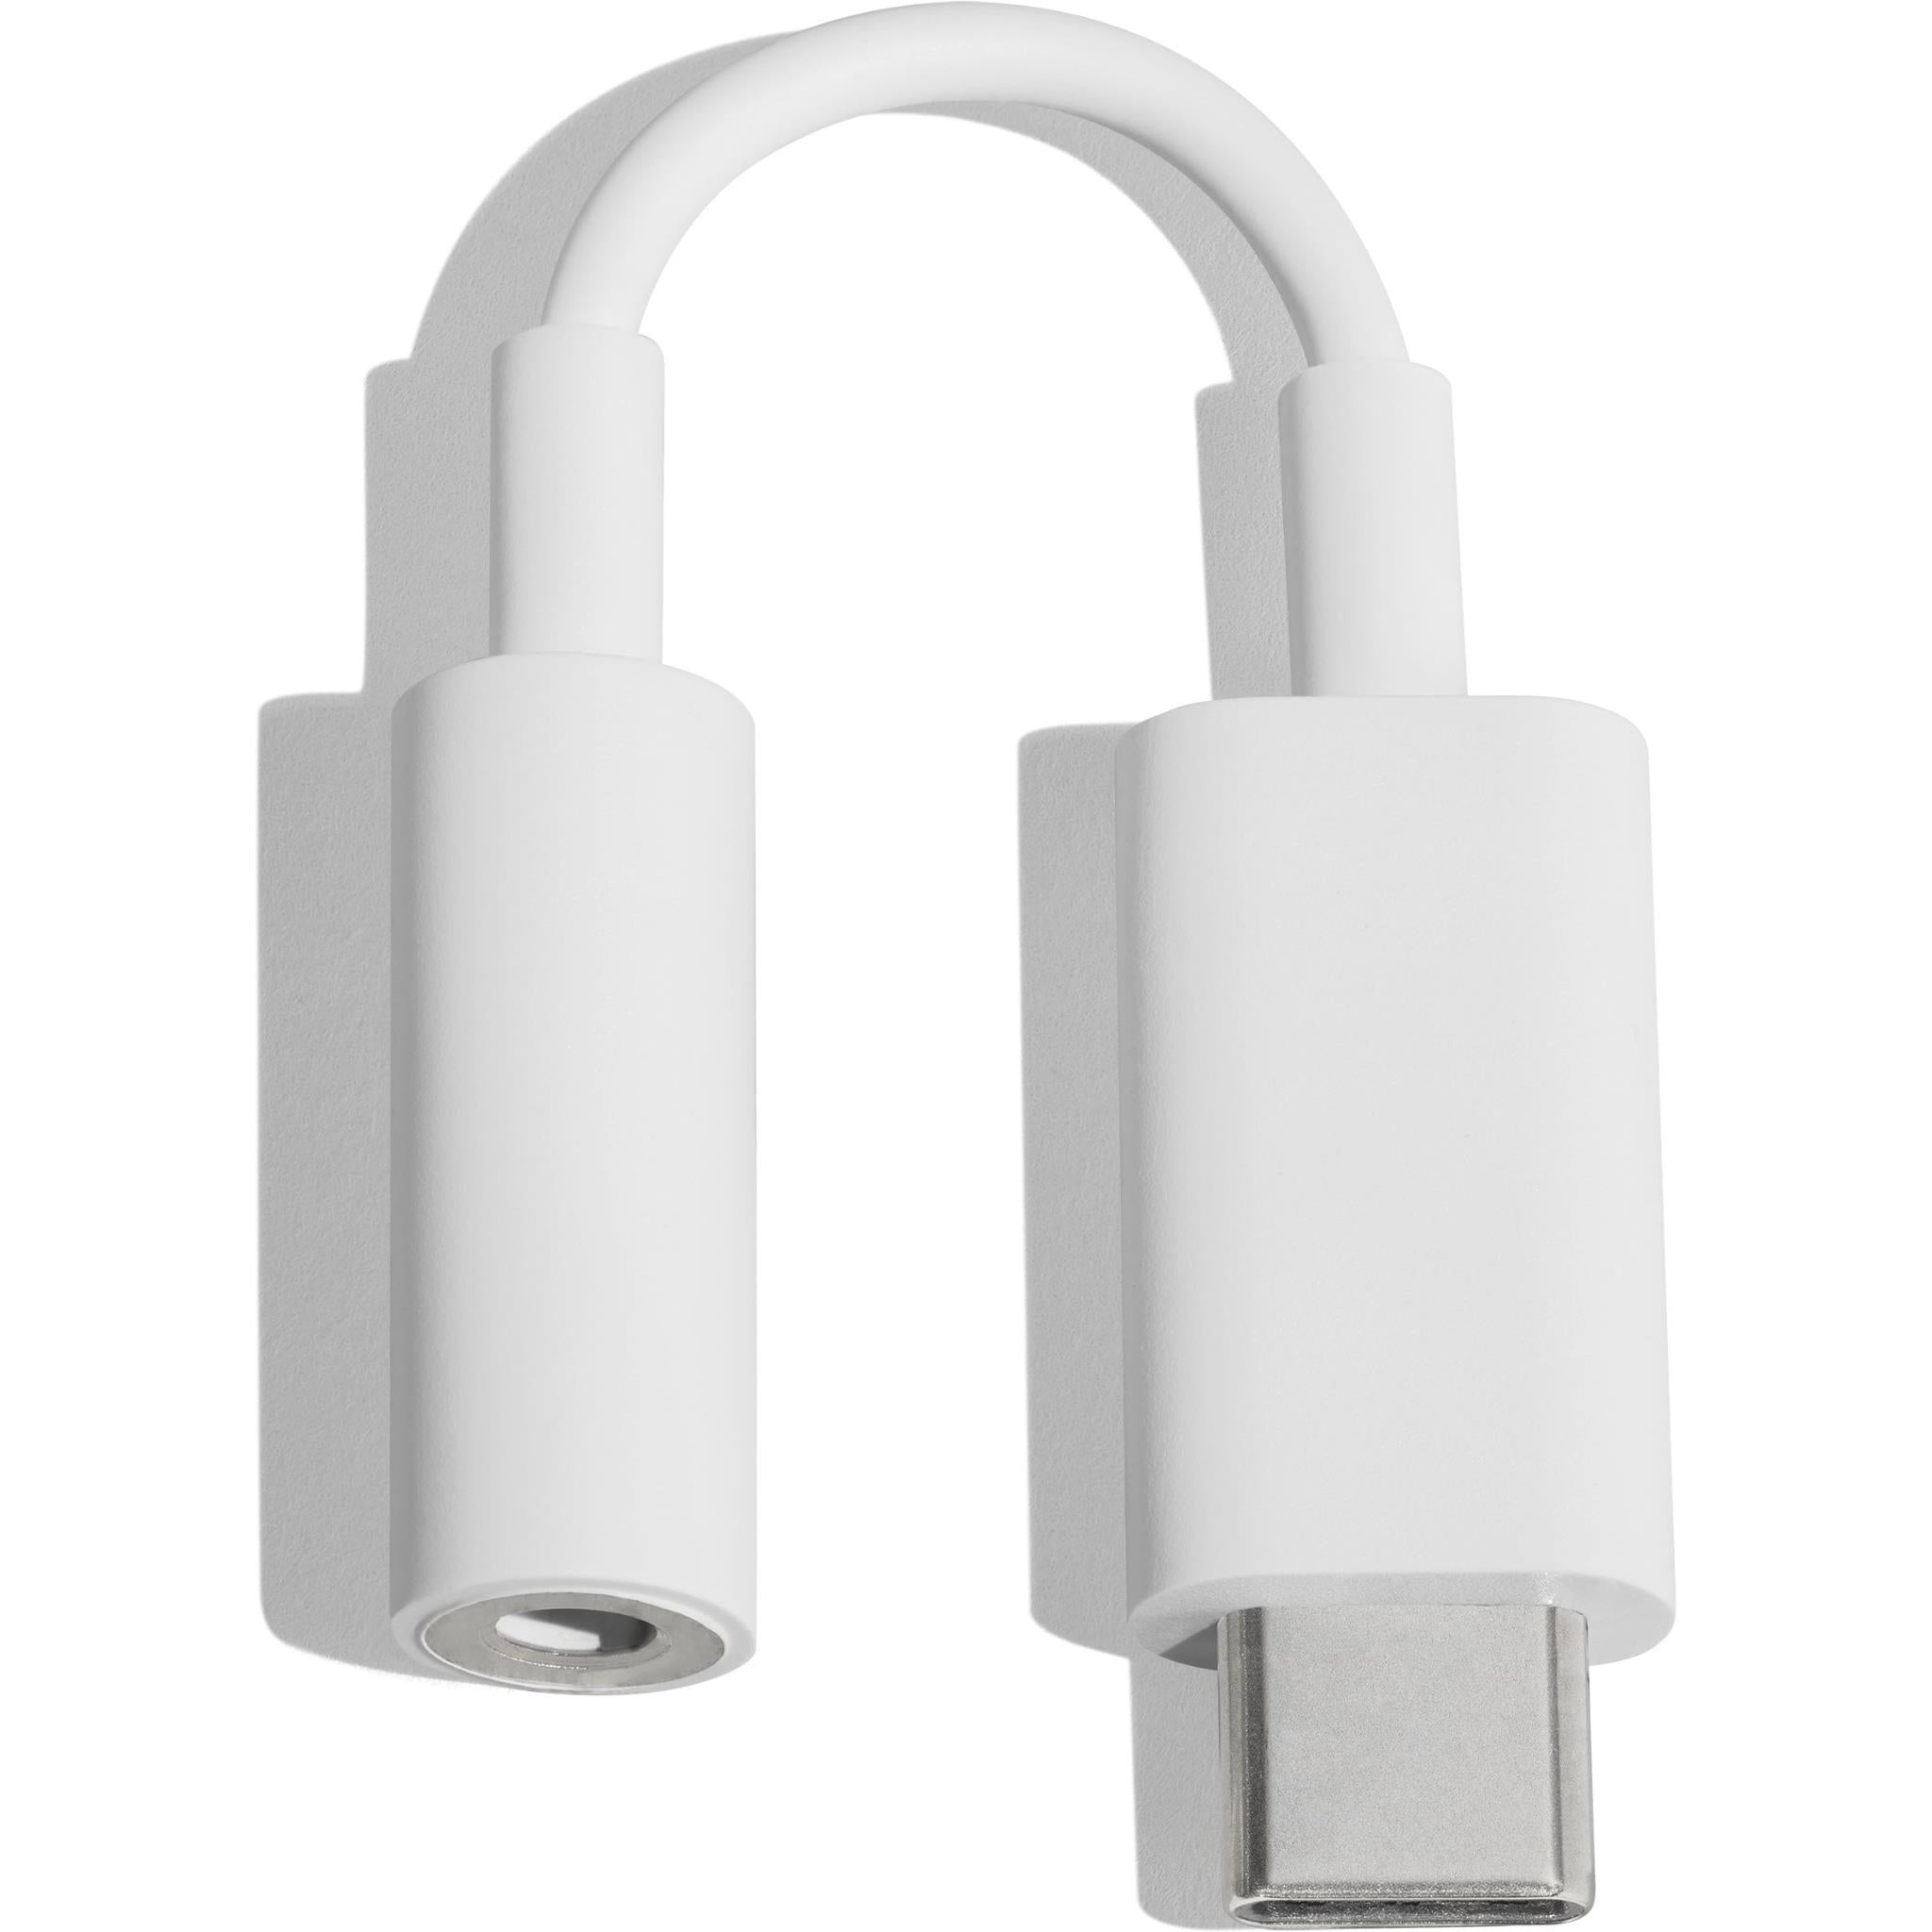 Google USB-C to USB-A Cable